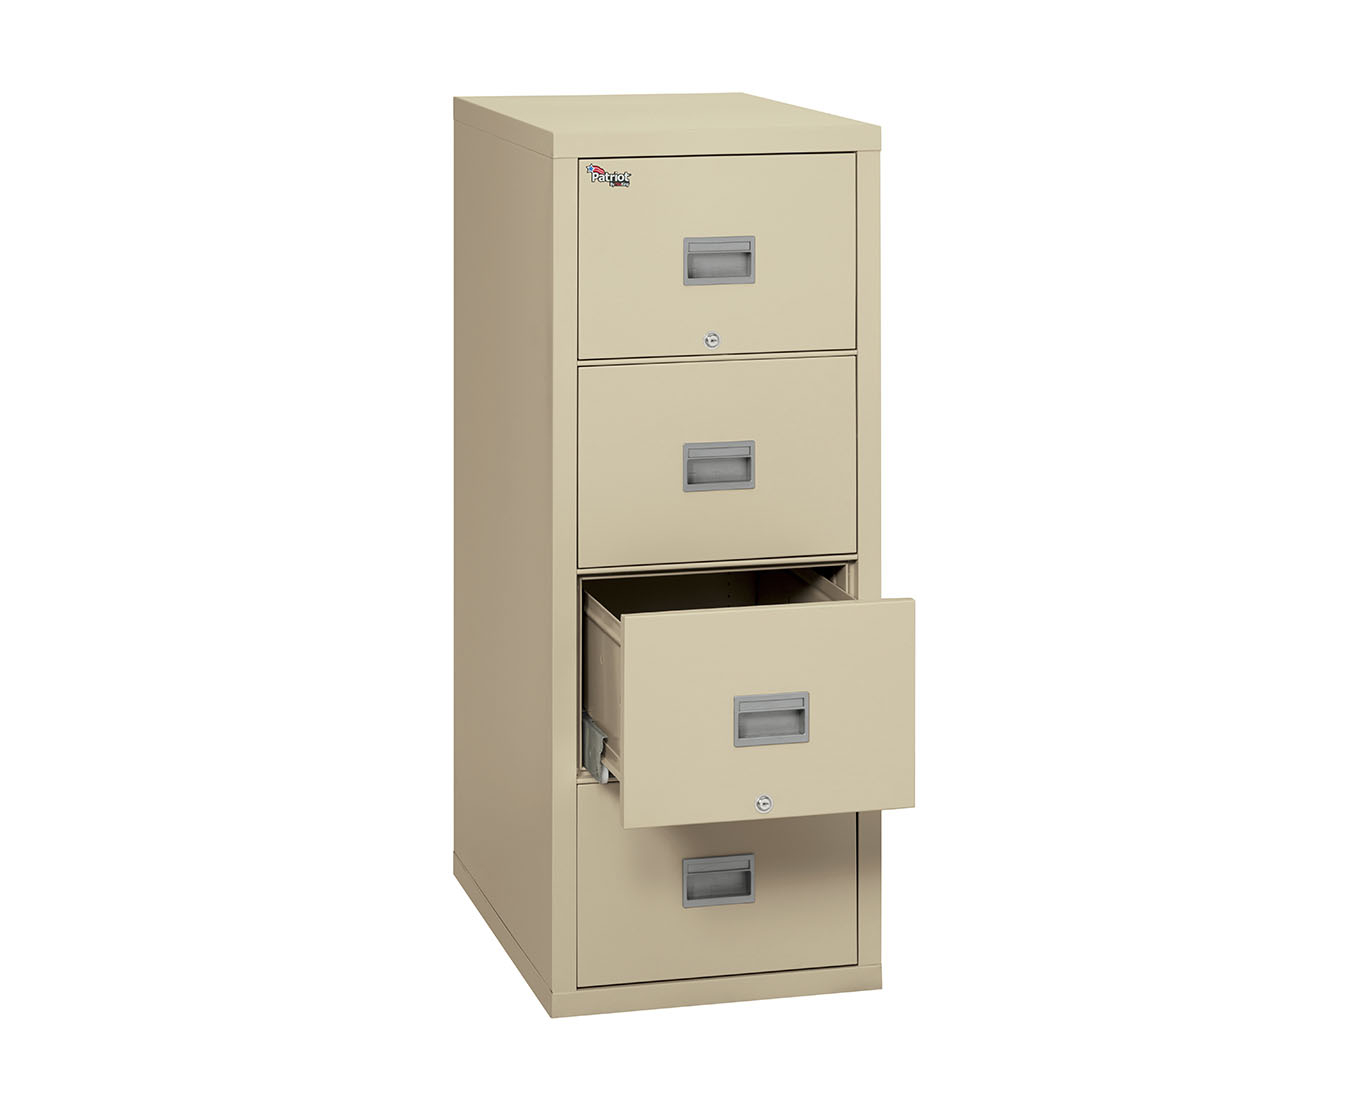 Patriot Vertical File Cabinets Fireking Security Group intended for size 1366 X 1110